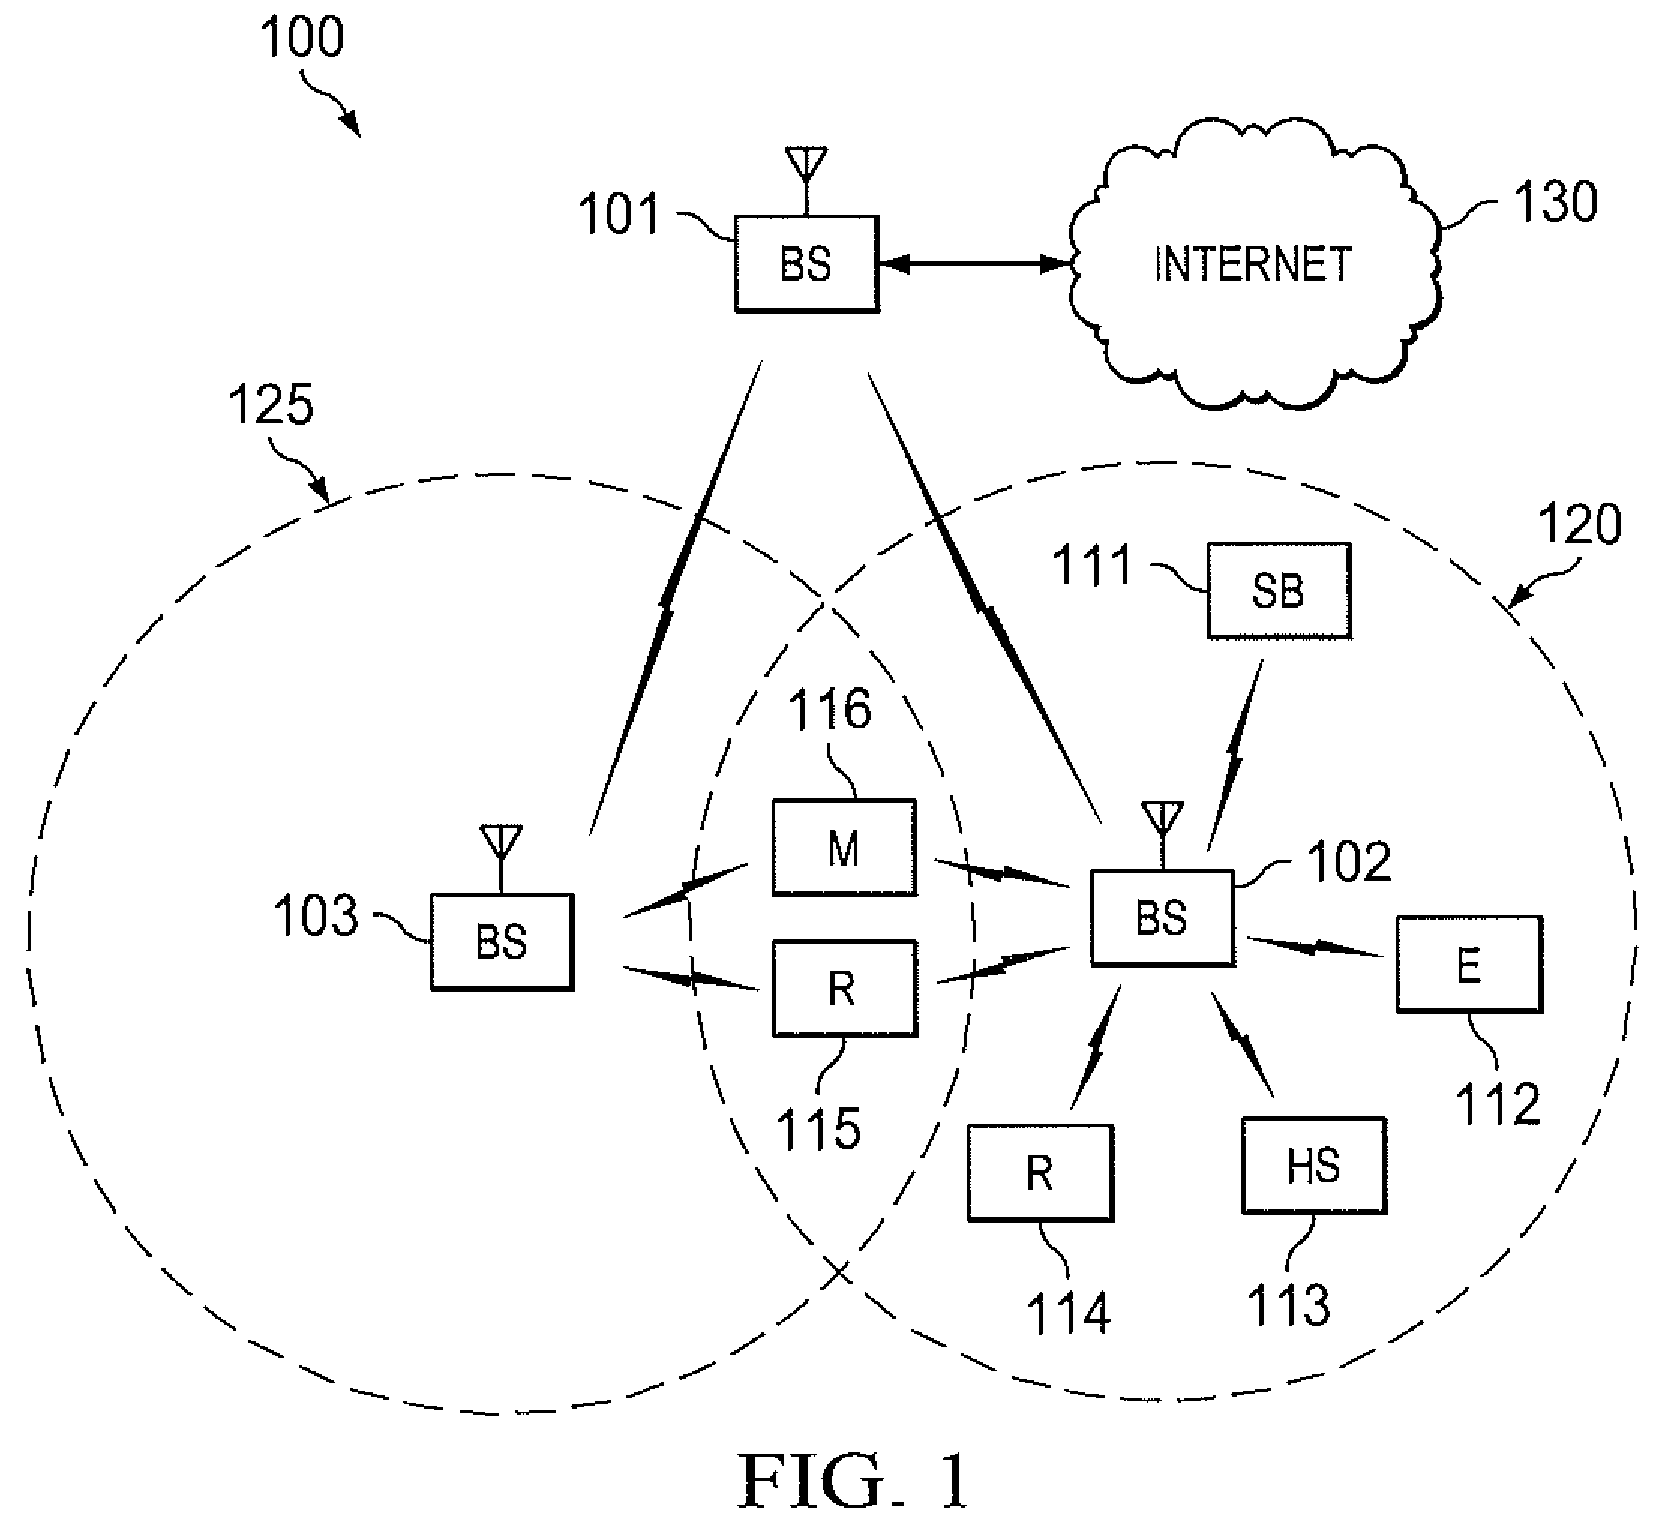 System and method for low complexity raptor codes for multimedia broadcast/multicast service